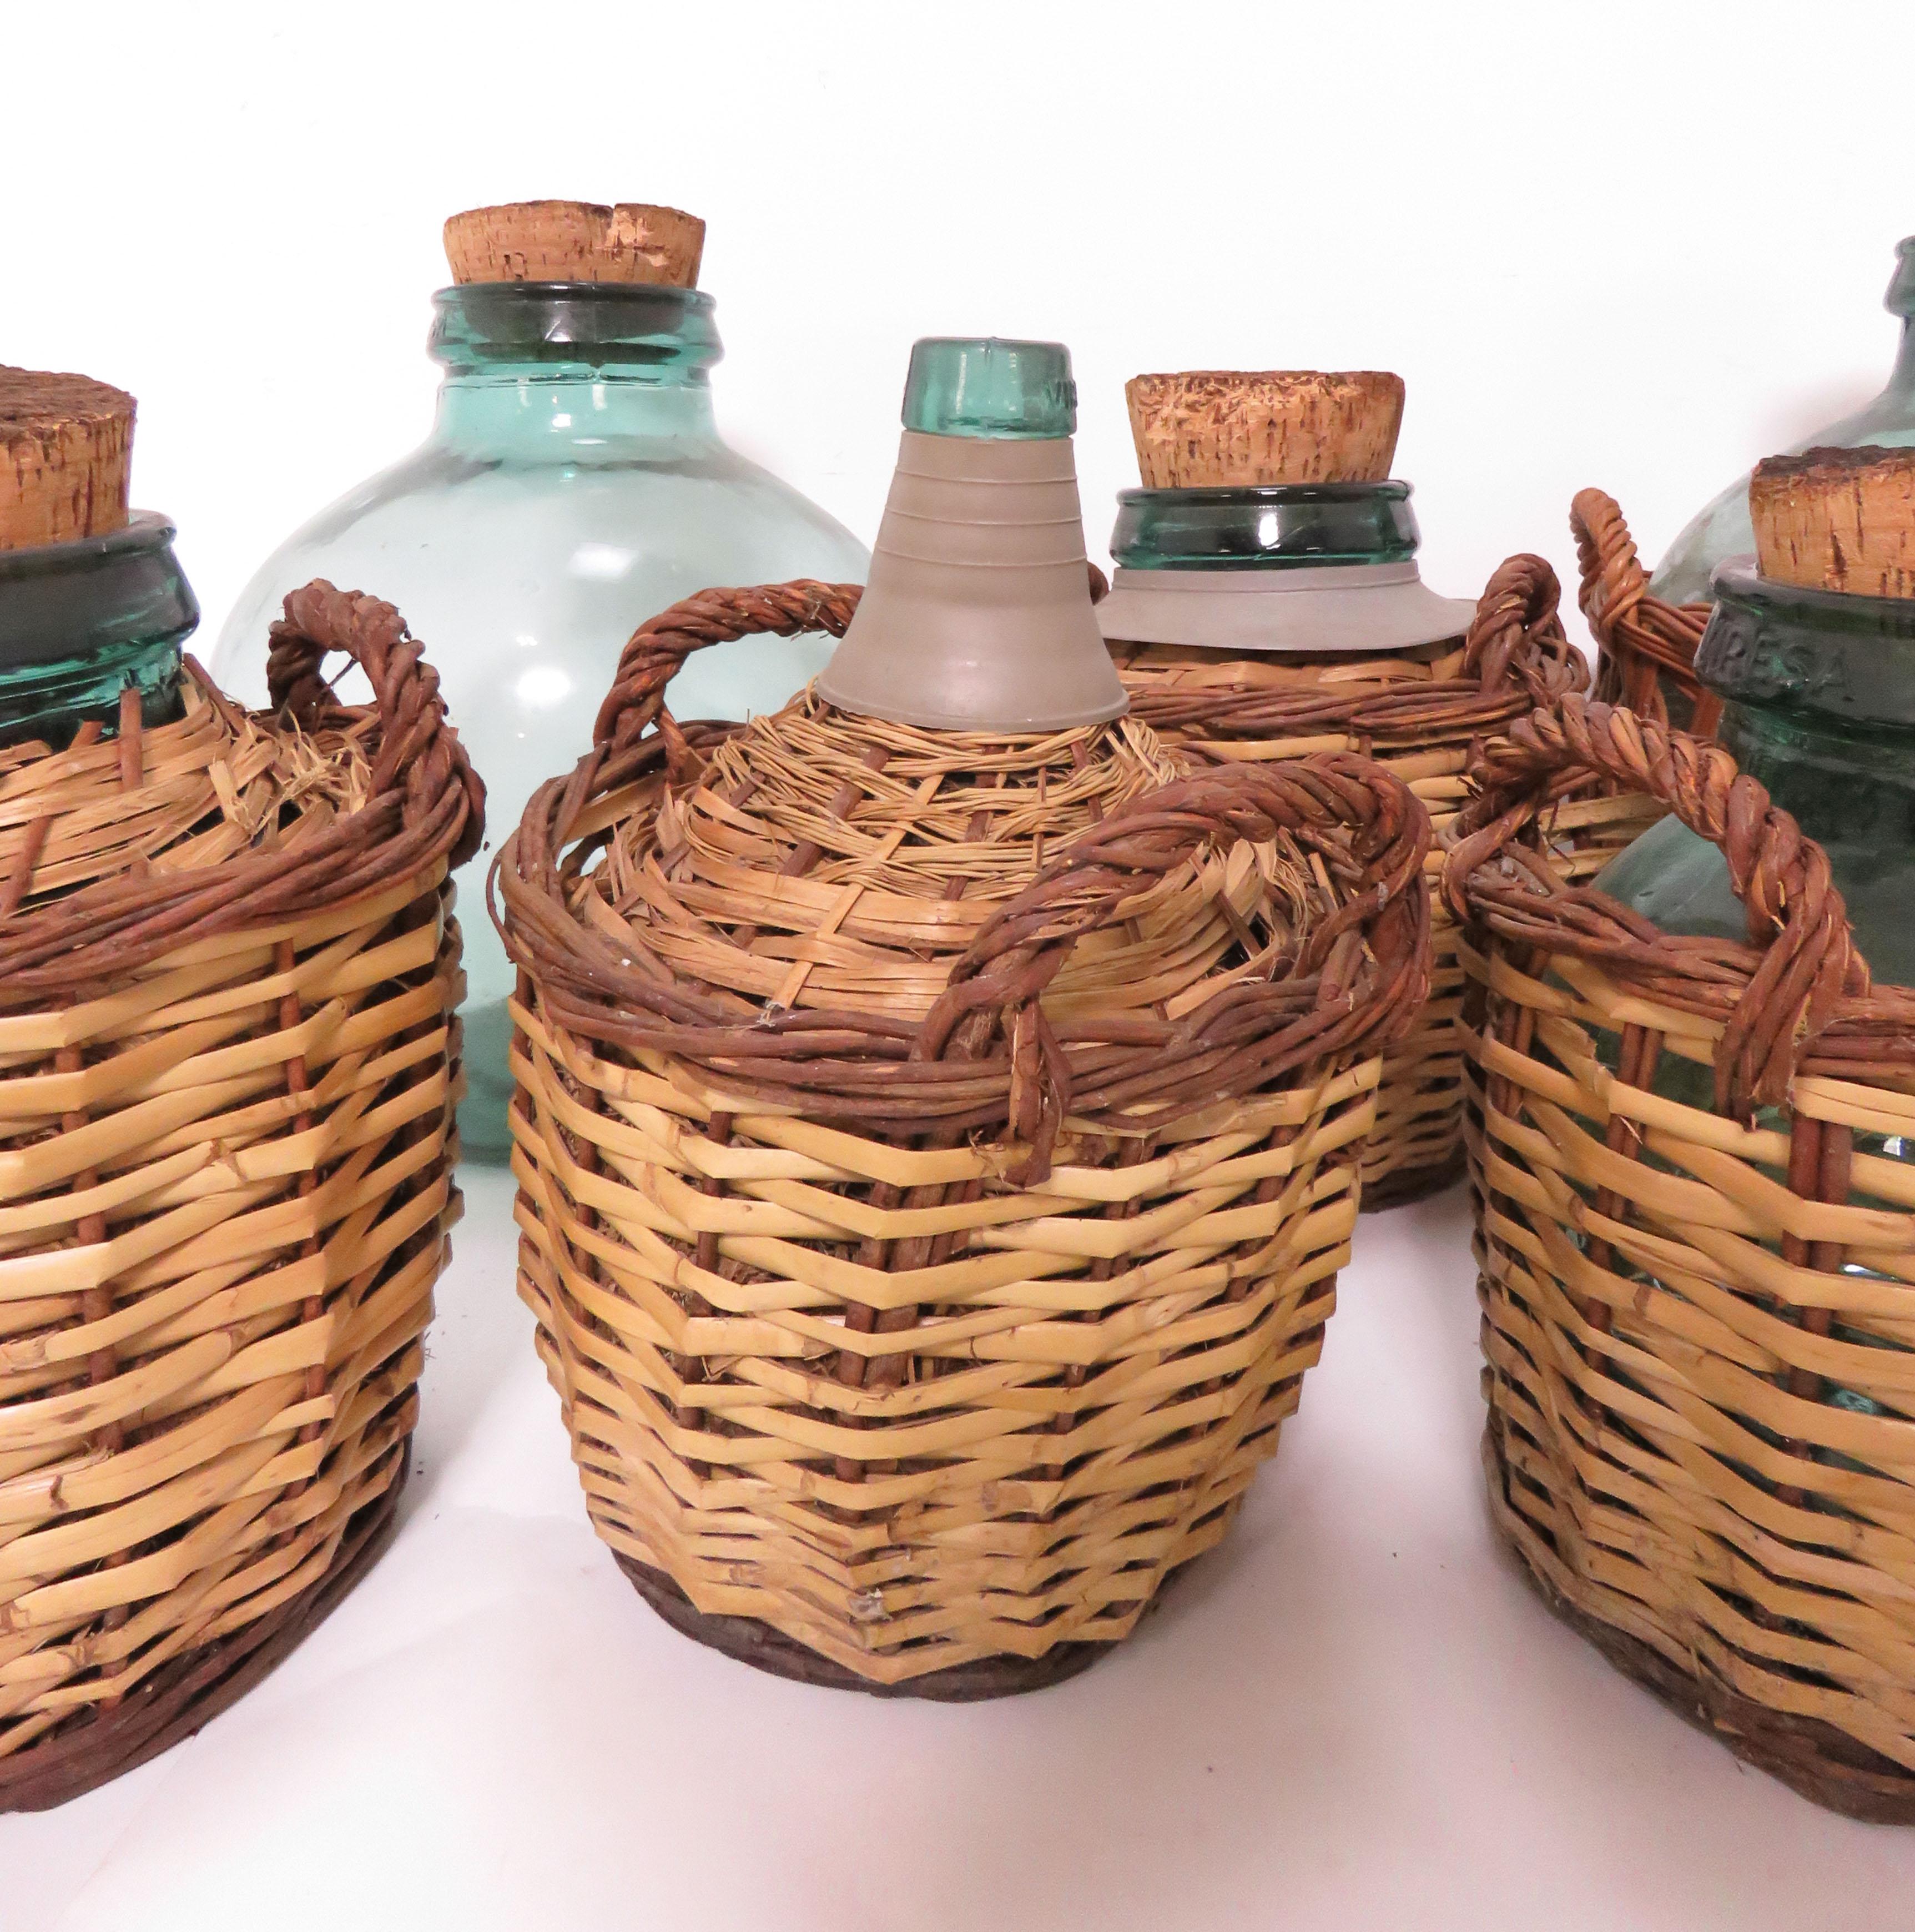 French Provincial Collection of Seven Antique French Demijohn Carboy Bottles, circa 1930s-1940s